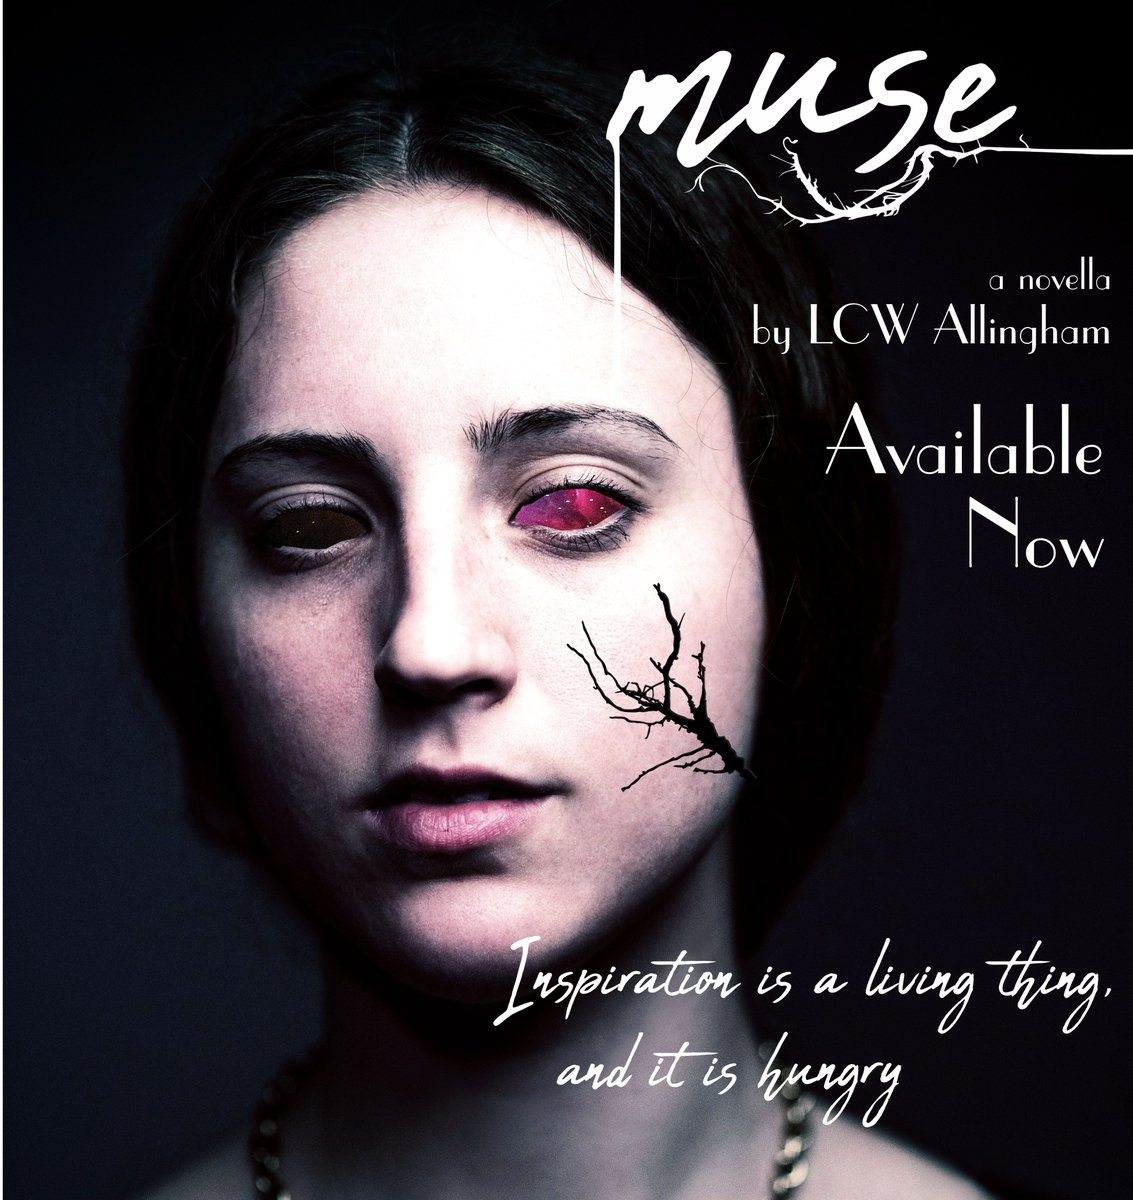 If I had a favorite promotional image, it would be this one. MUSE has been released onto the world.
speculationpub.com/muse 
#NewBookRelease #NewHorror #MustReads #AuthorUpROAR #BookBoost #IndieApril #SupportIndie #BookTwitter